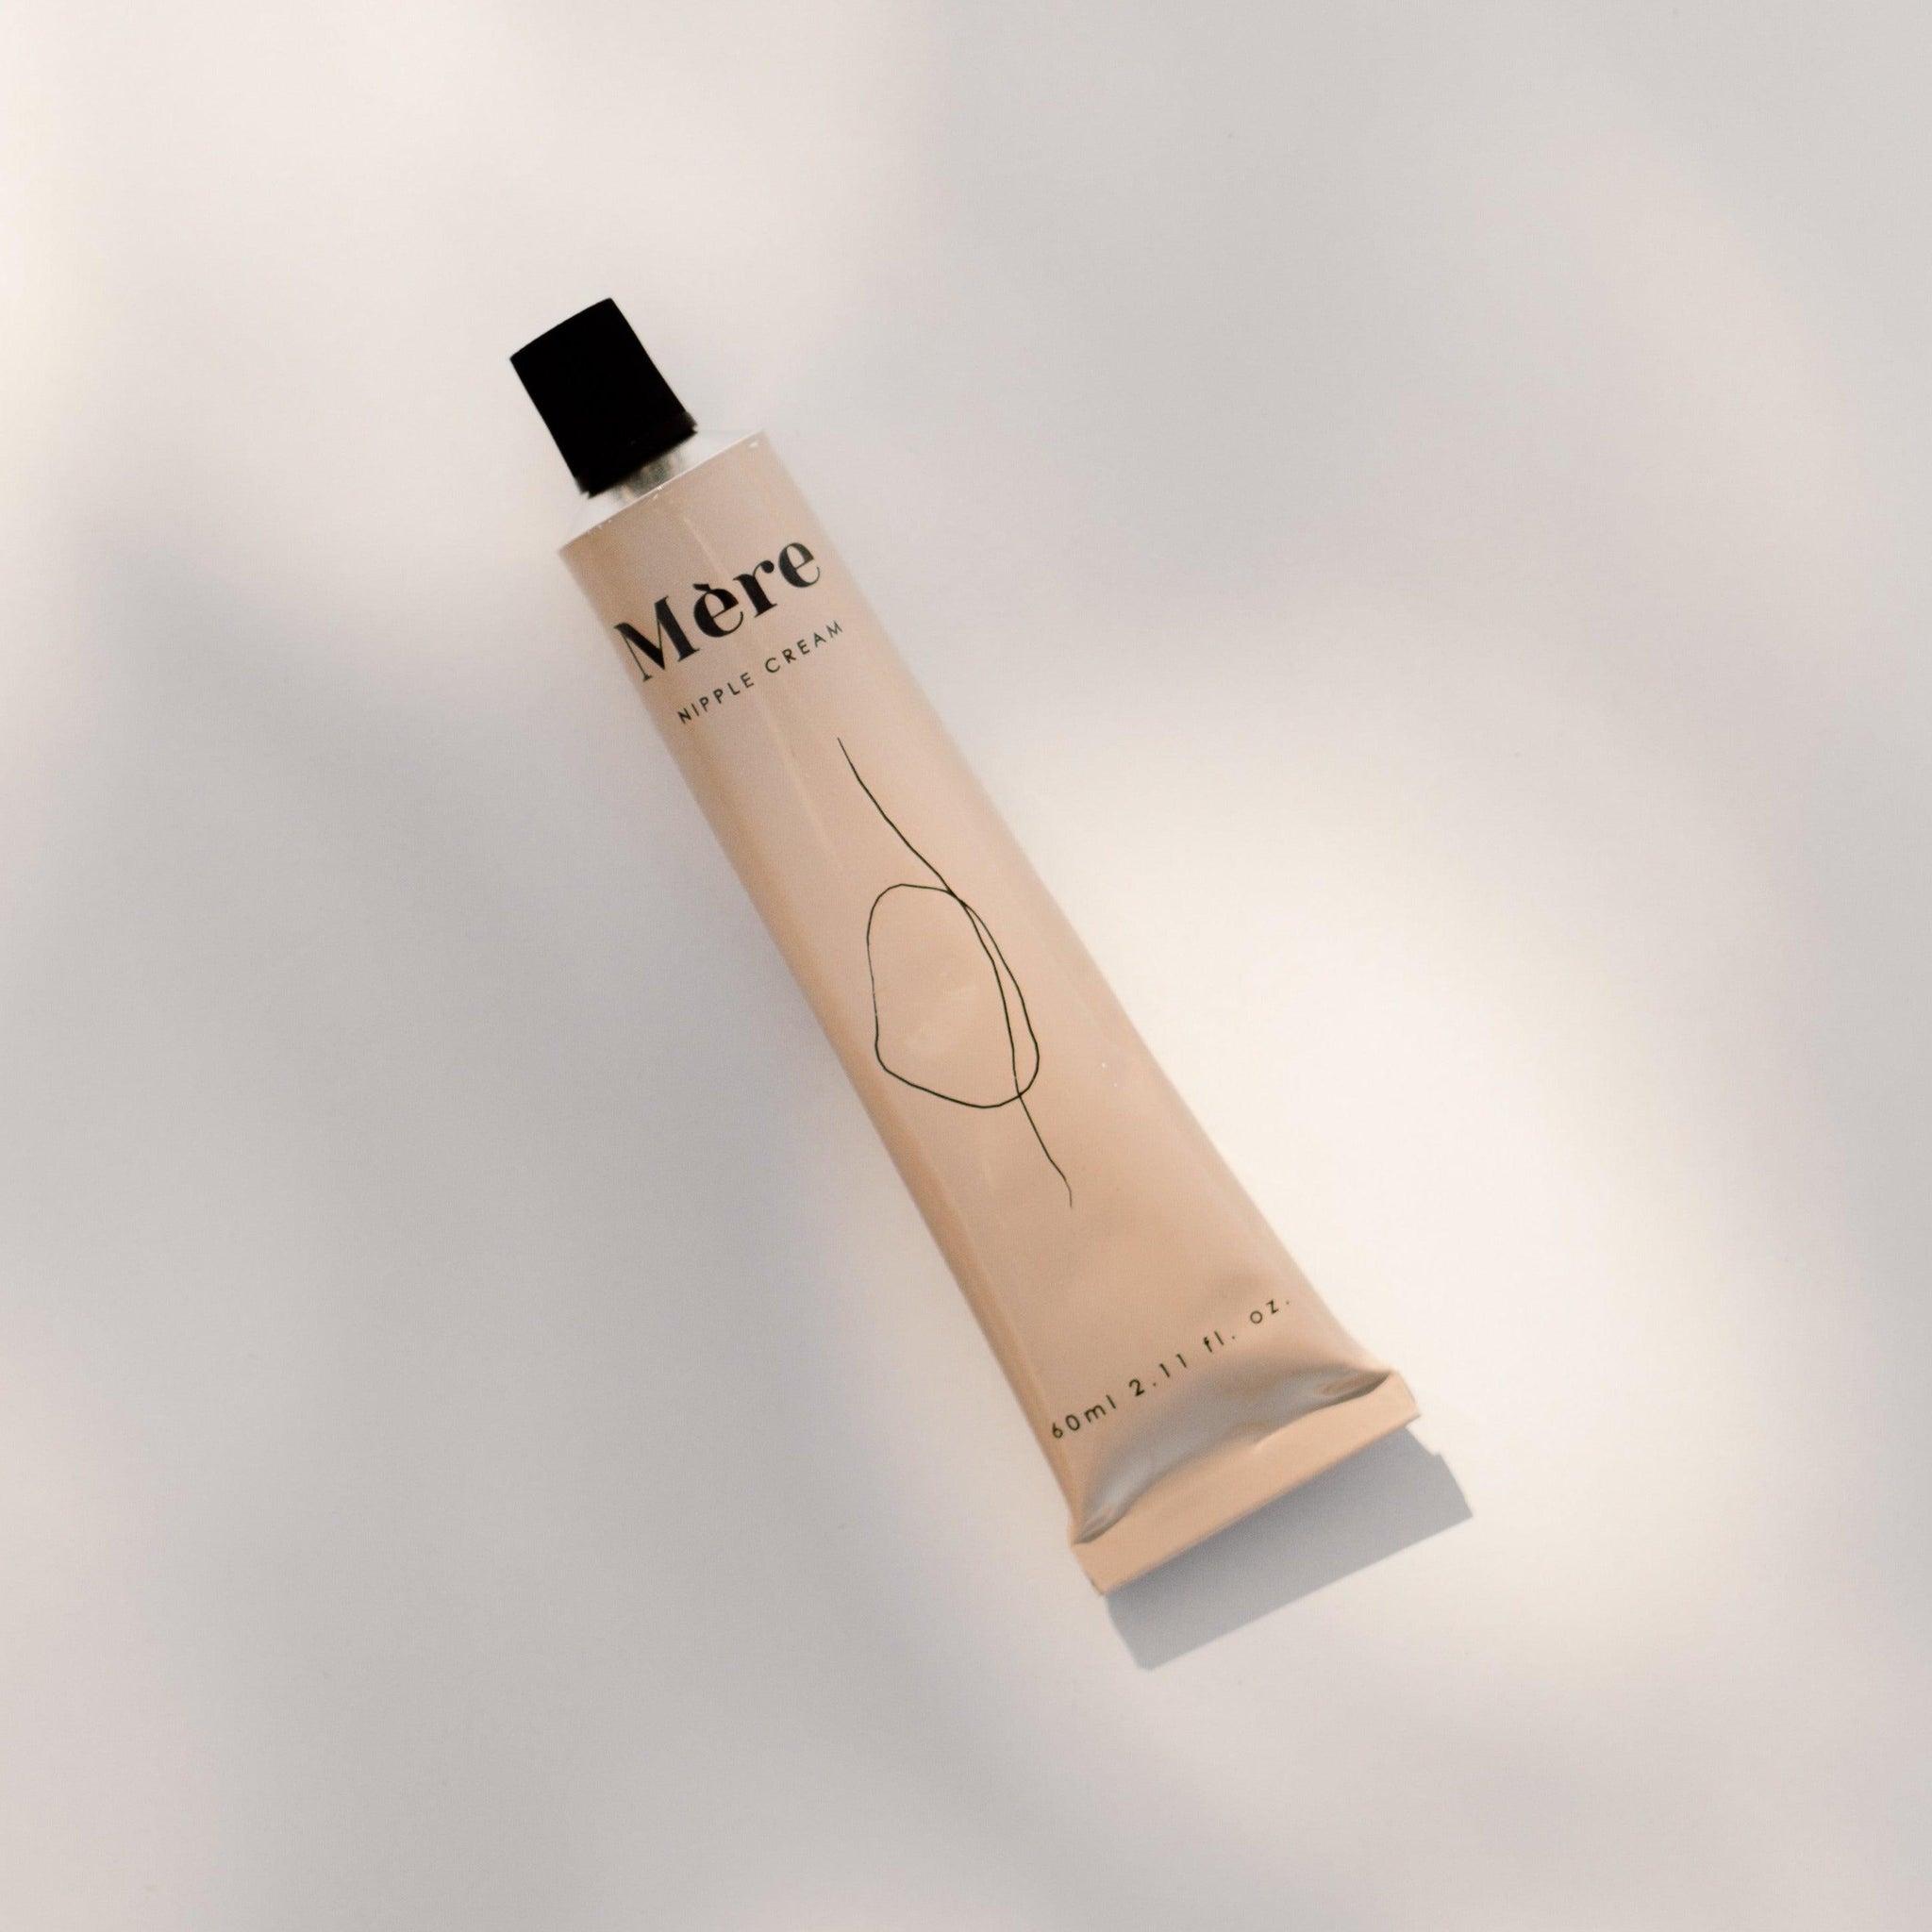 A tube of Mère nipple cream sitting on a white surface.